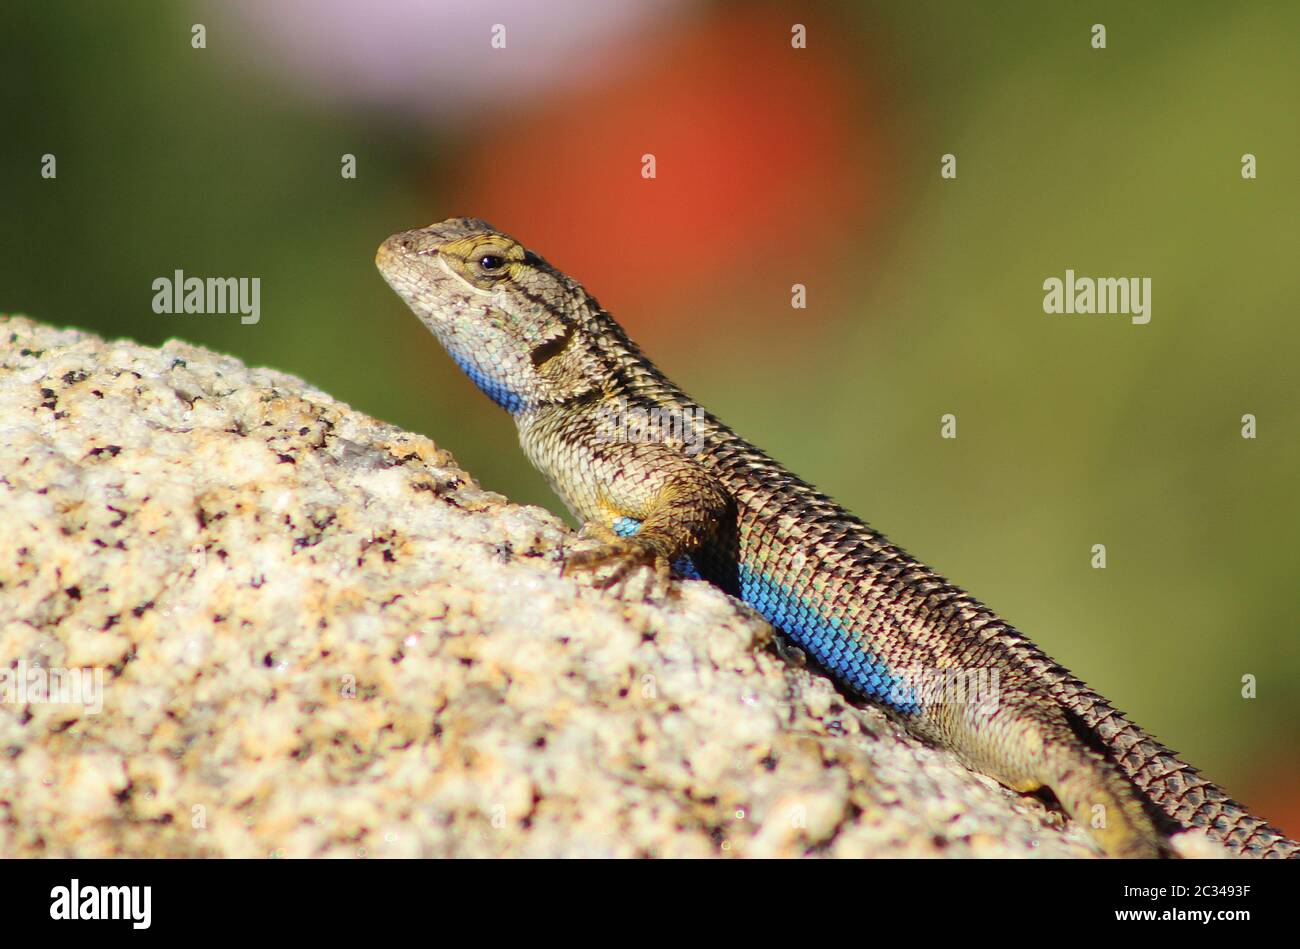 Close up of a Western Fence Lizard on a rock, showing off his blue belly Stock Photo